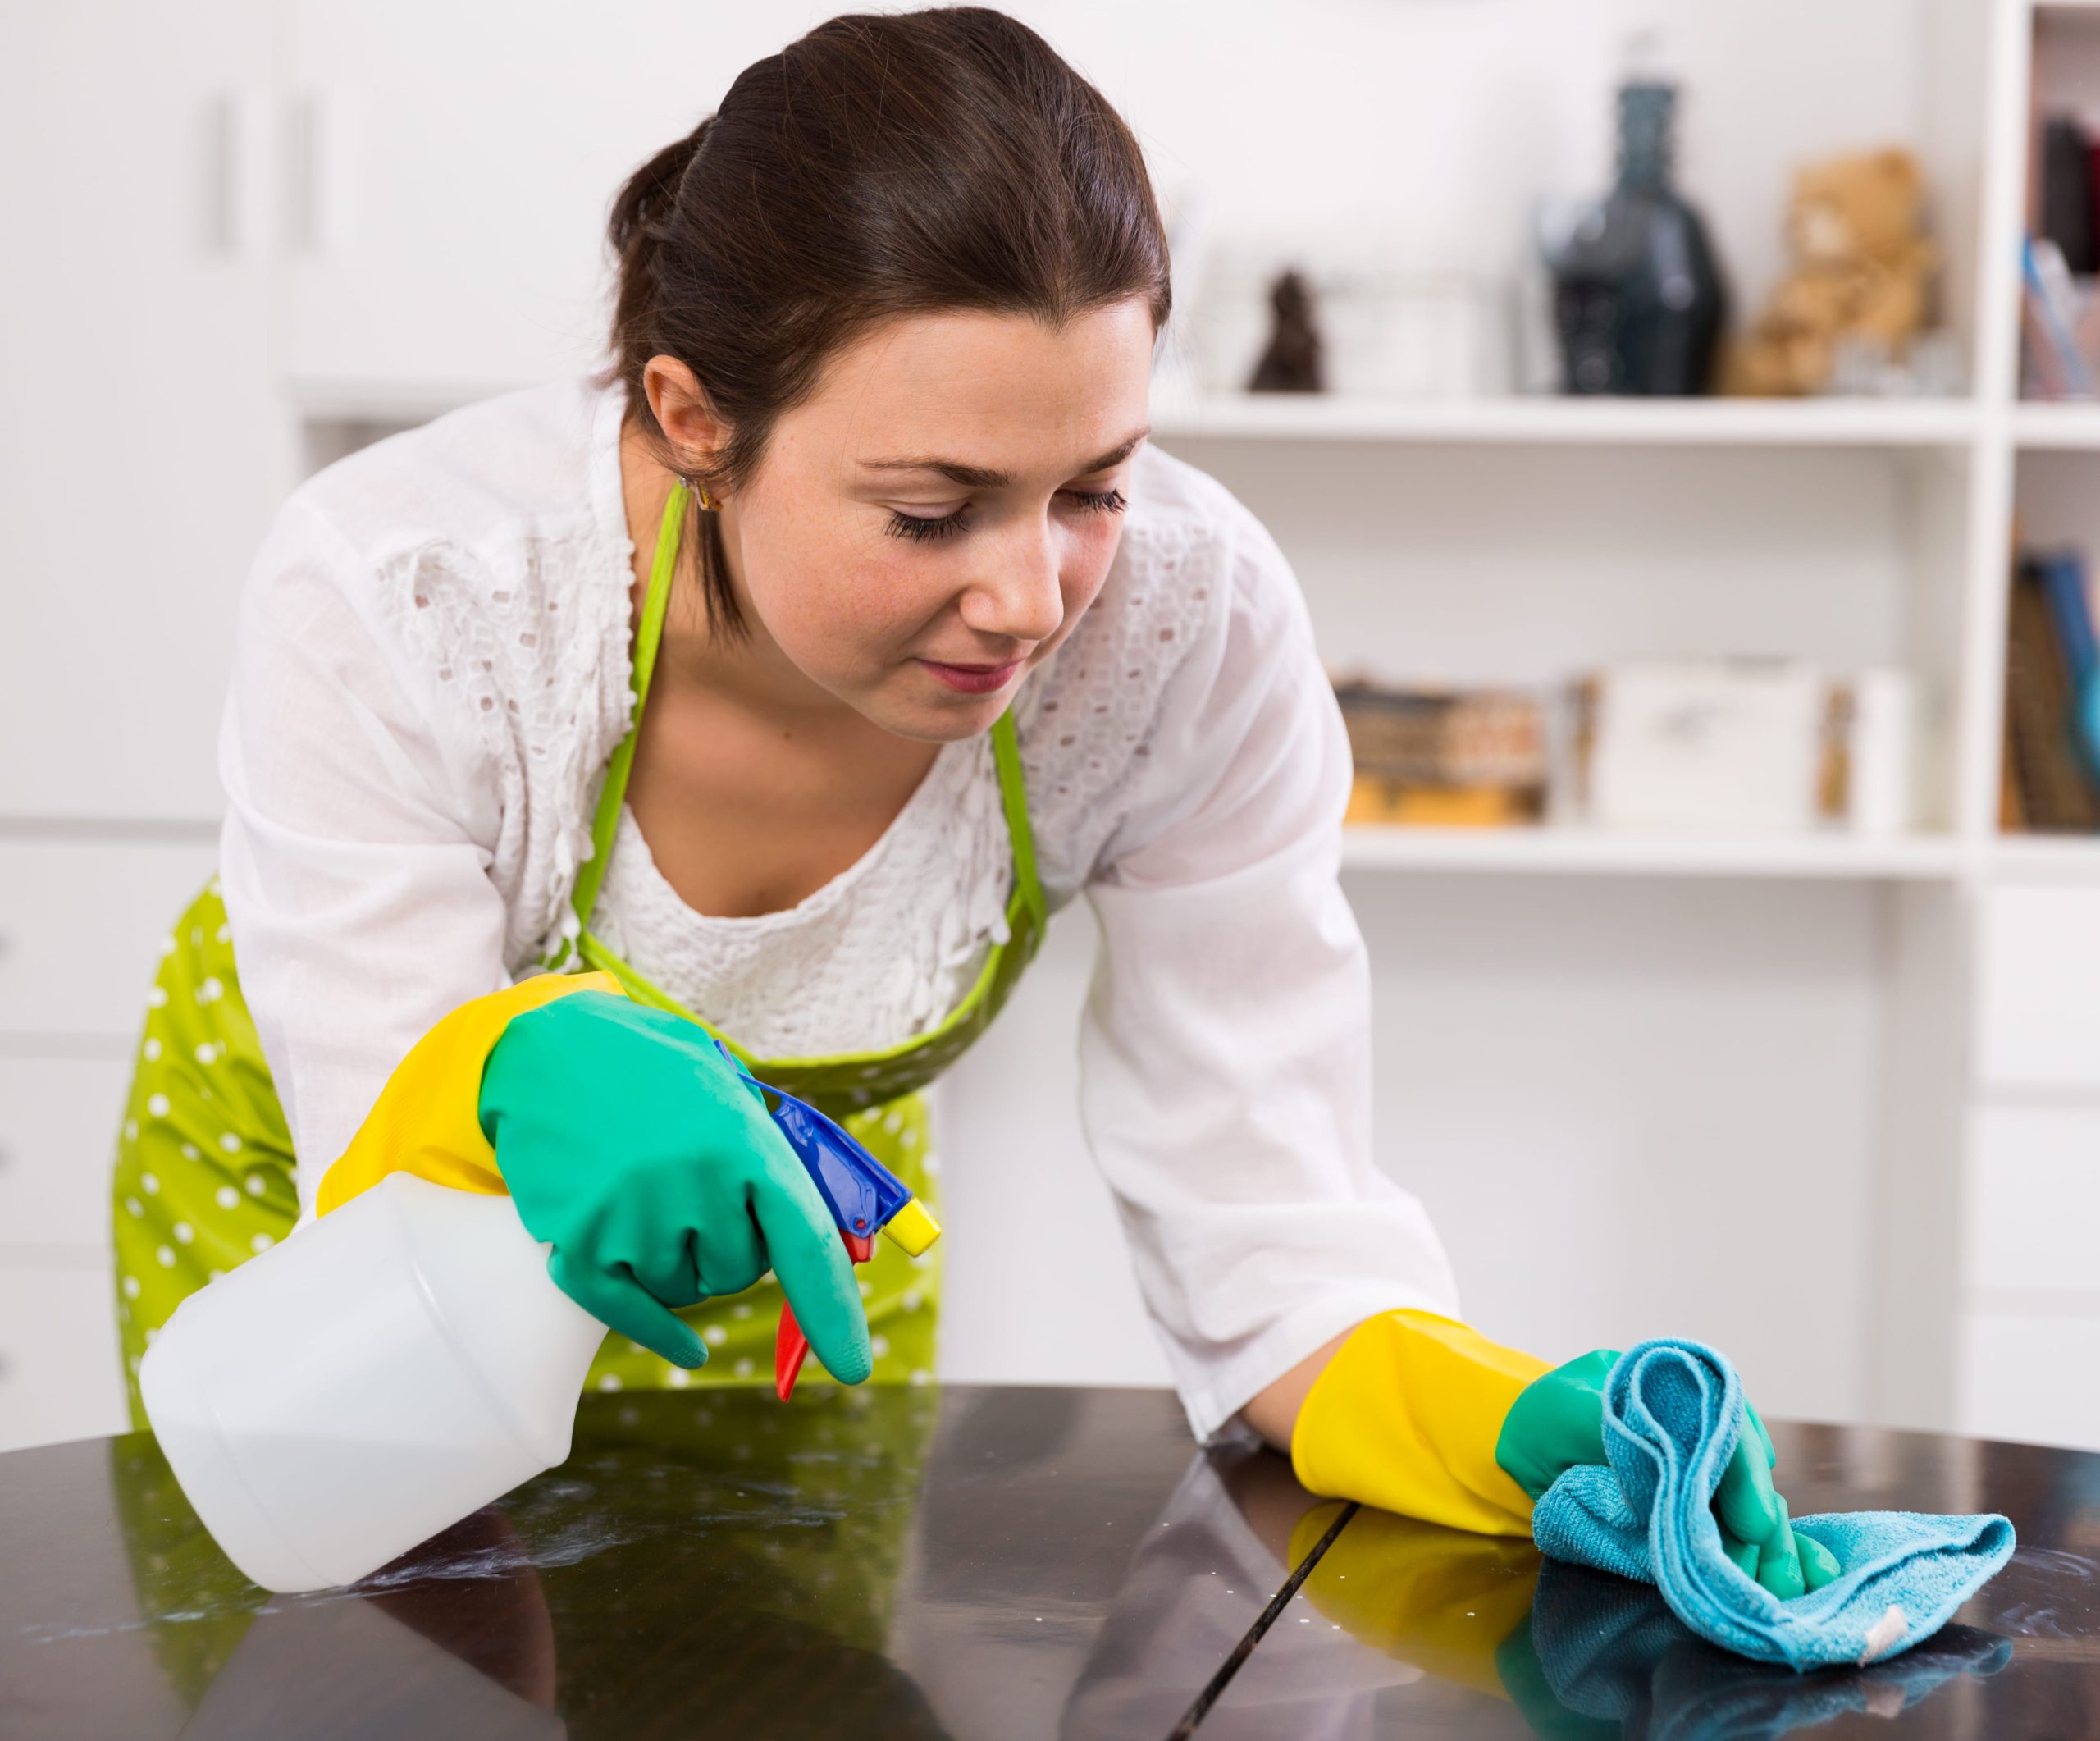 We Provide Best House Cleaning Services in El Paso TX